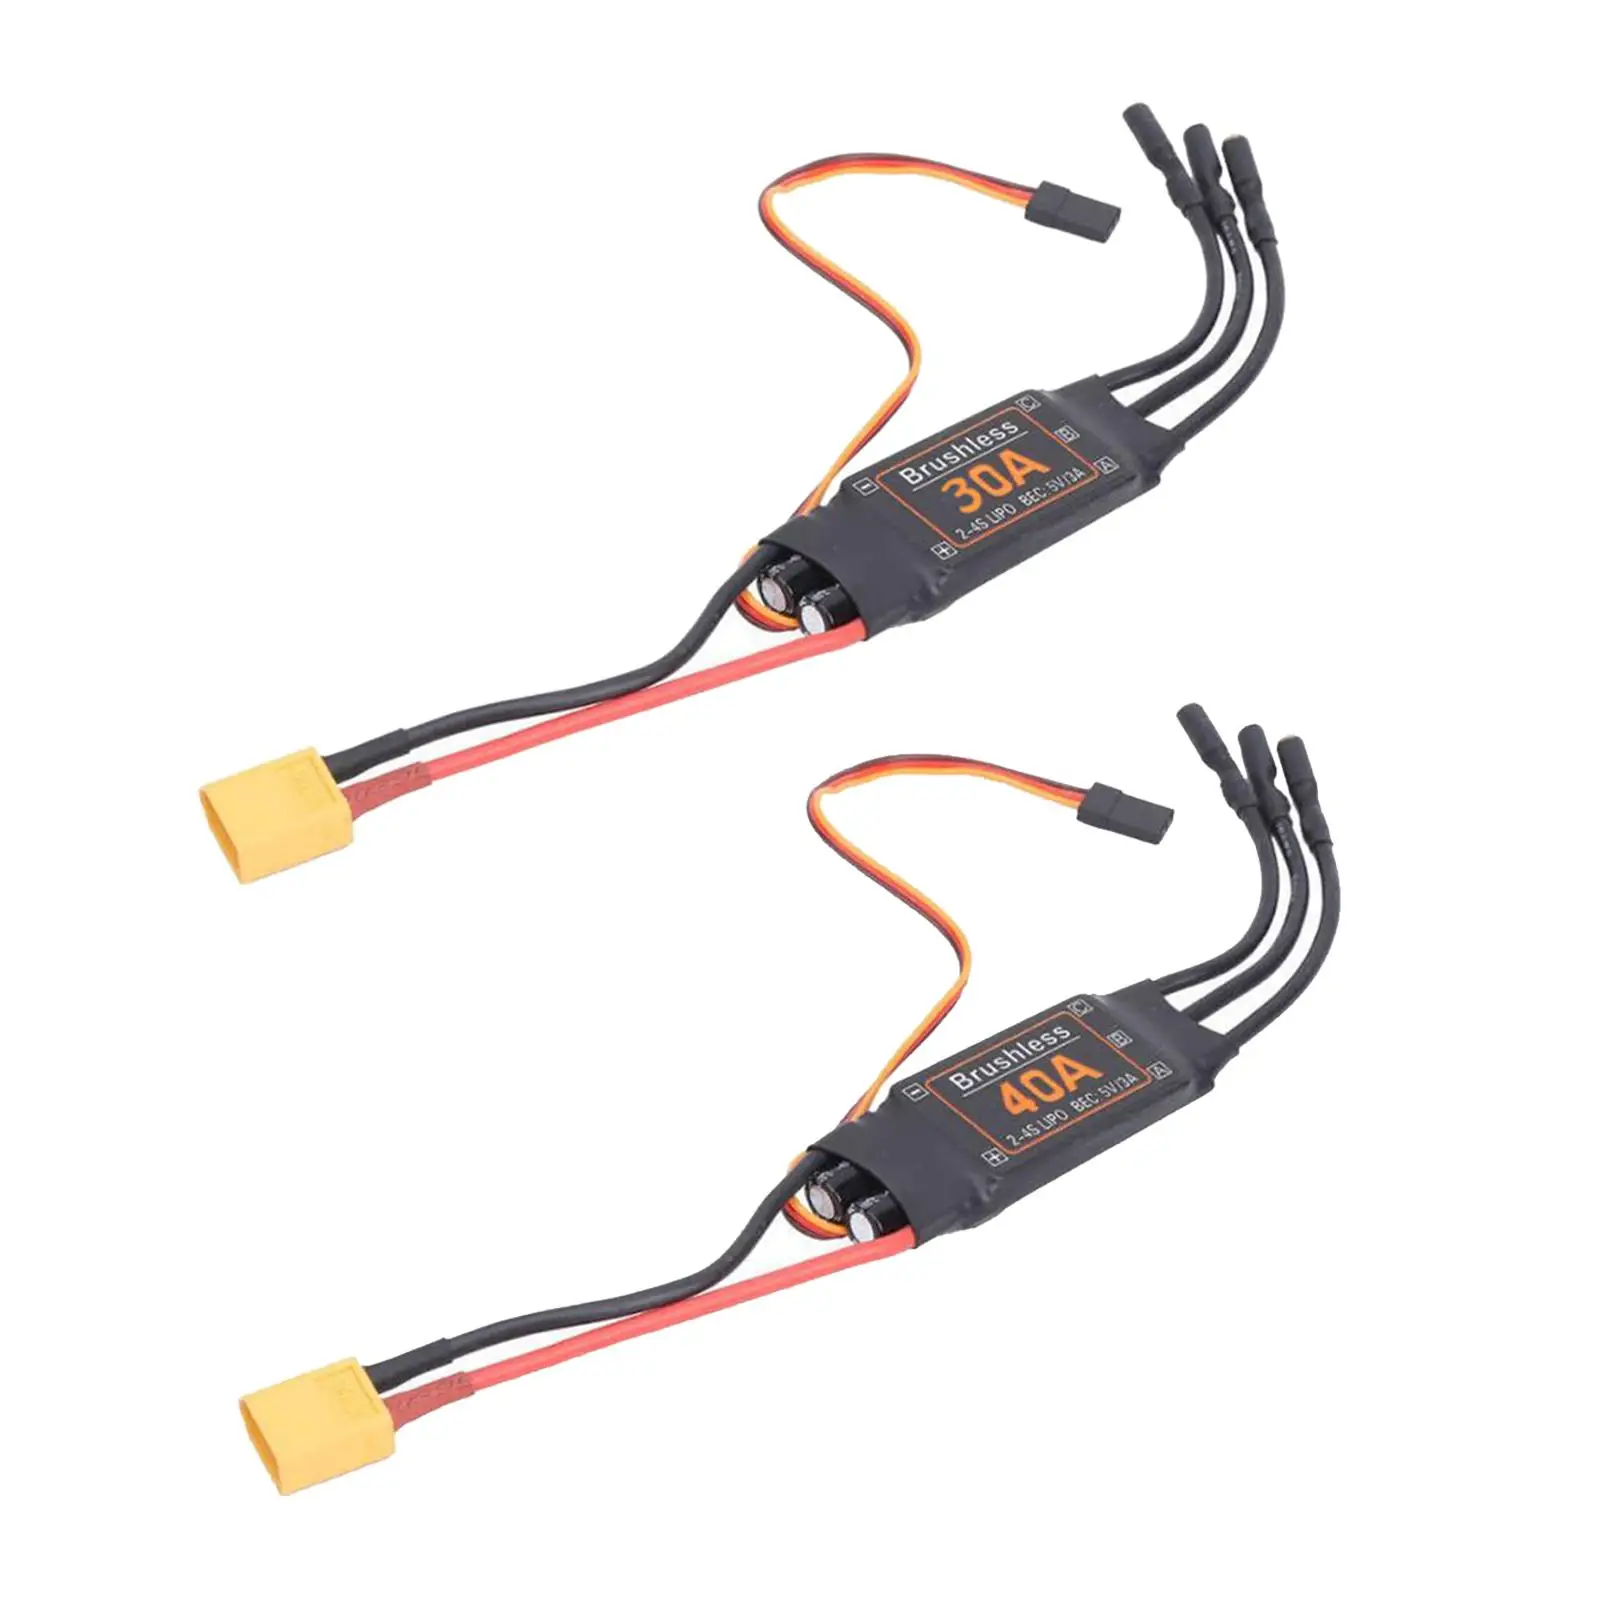 RC ESC XT60 Plug Low Battery Protection Accessories Upgrade Parts Replaces for RC Helicopter Accs Replaces images - 4